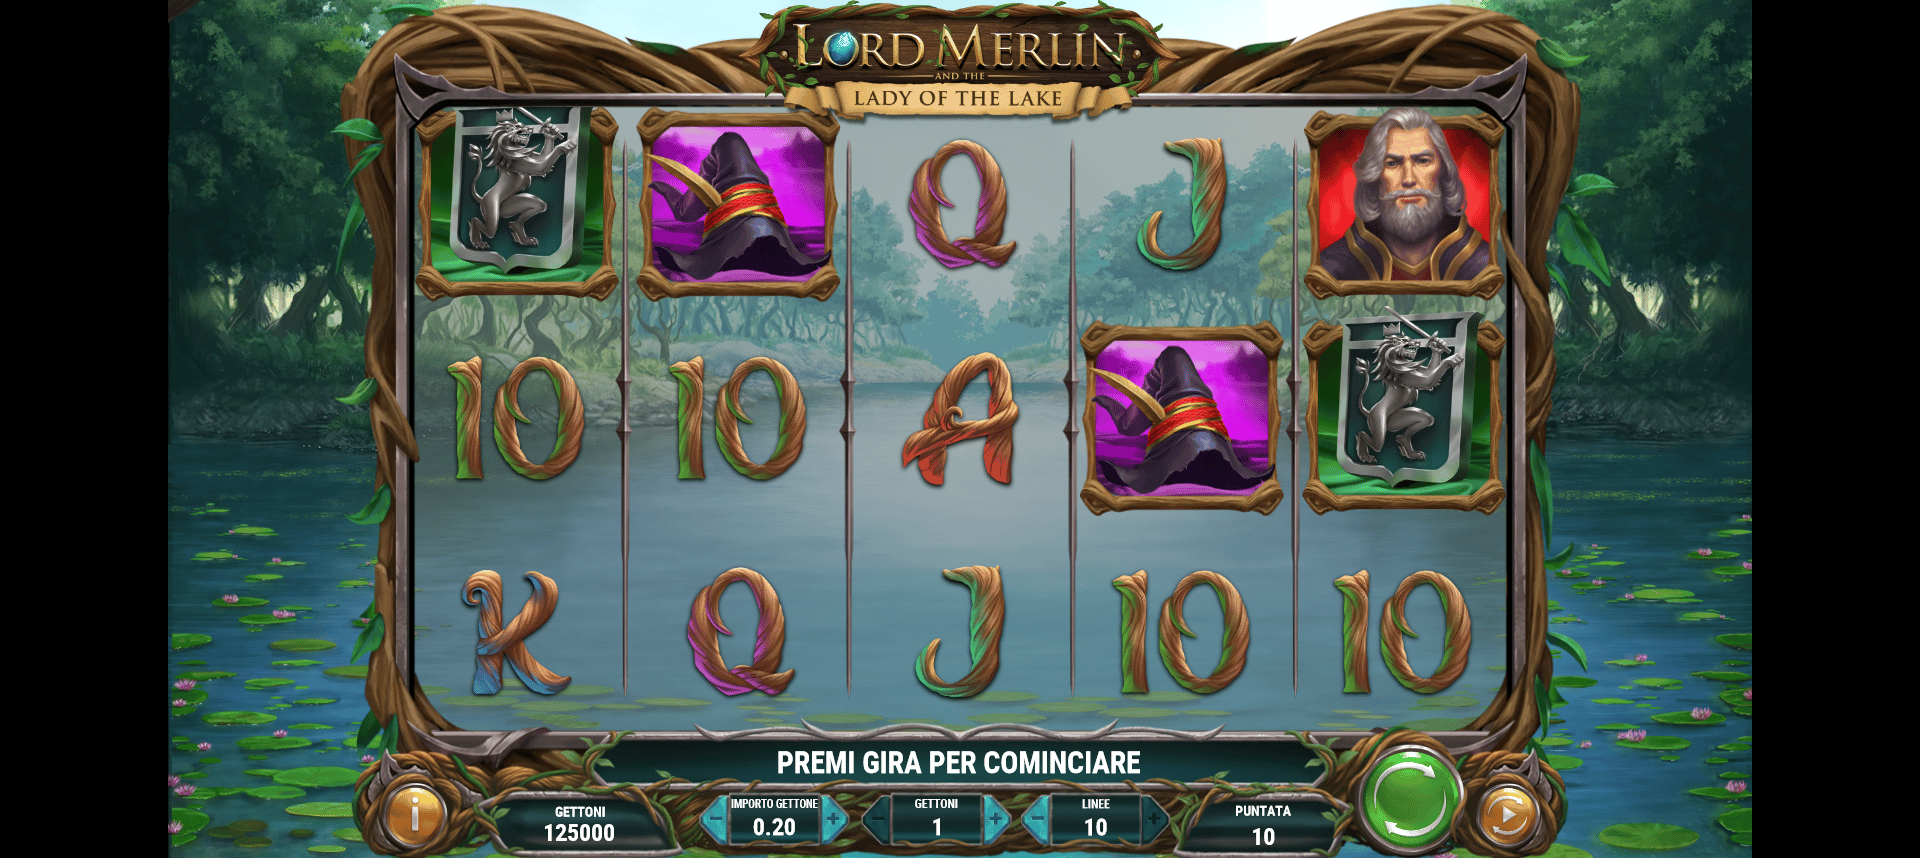 griglia del gioco slot lord merlin and the lady of the lake